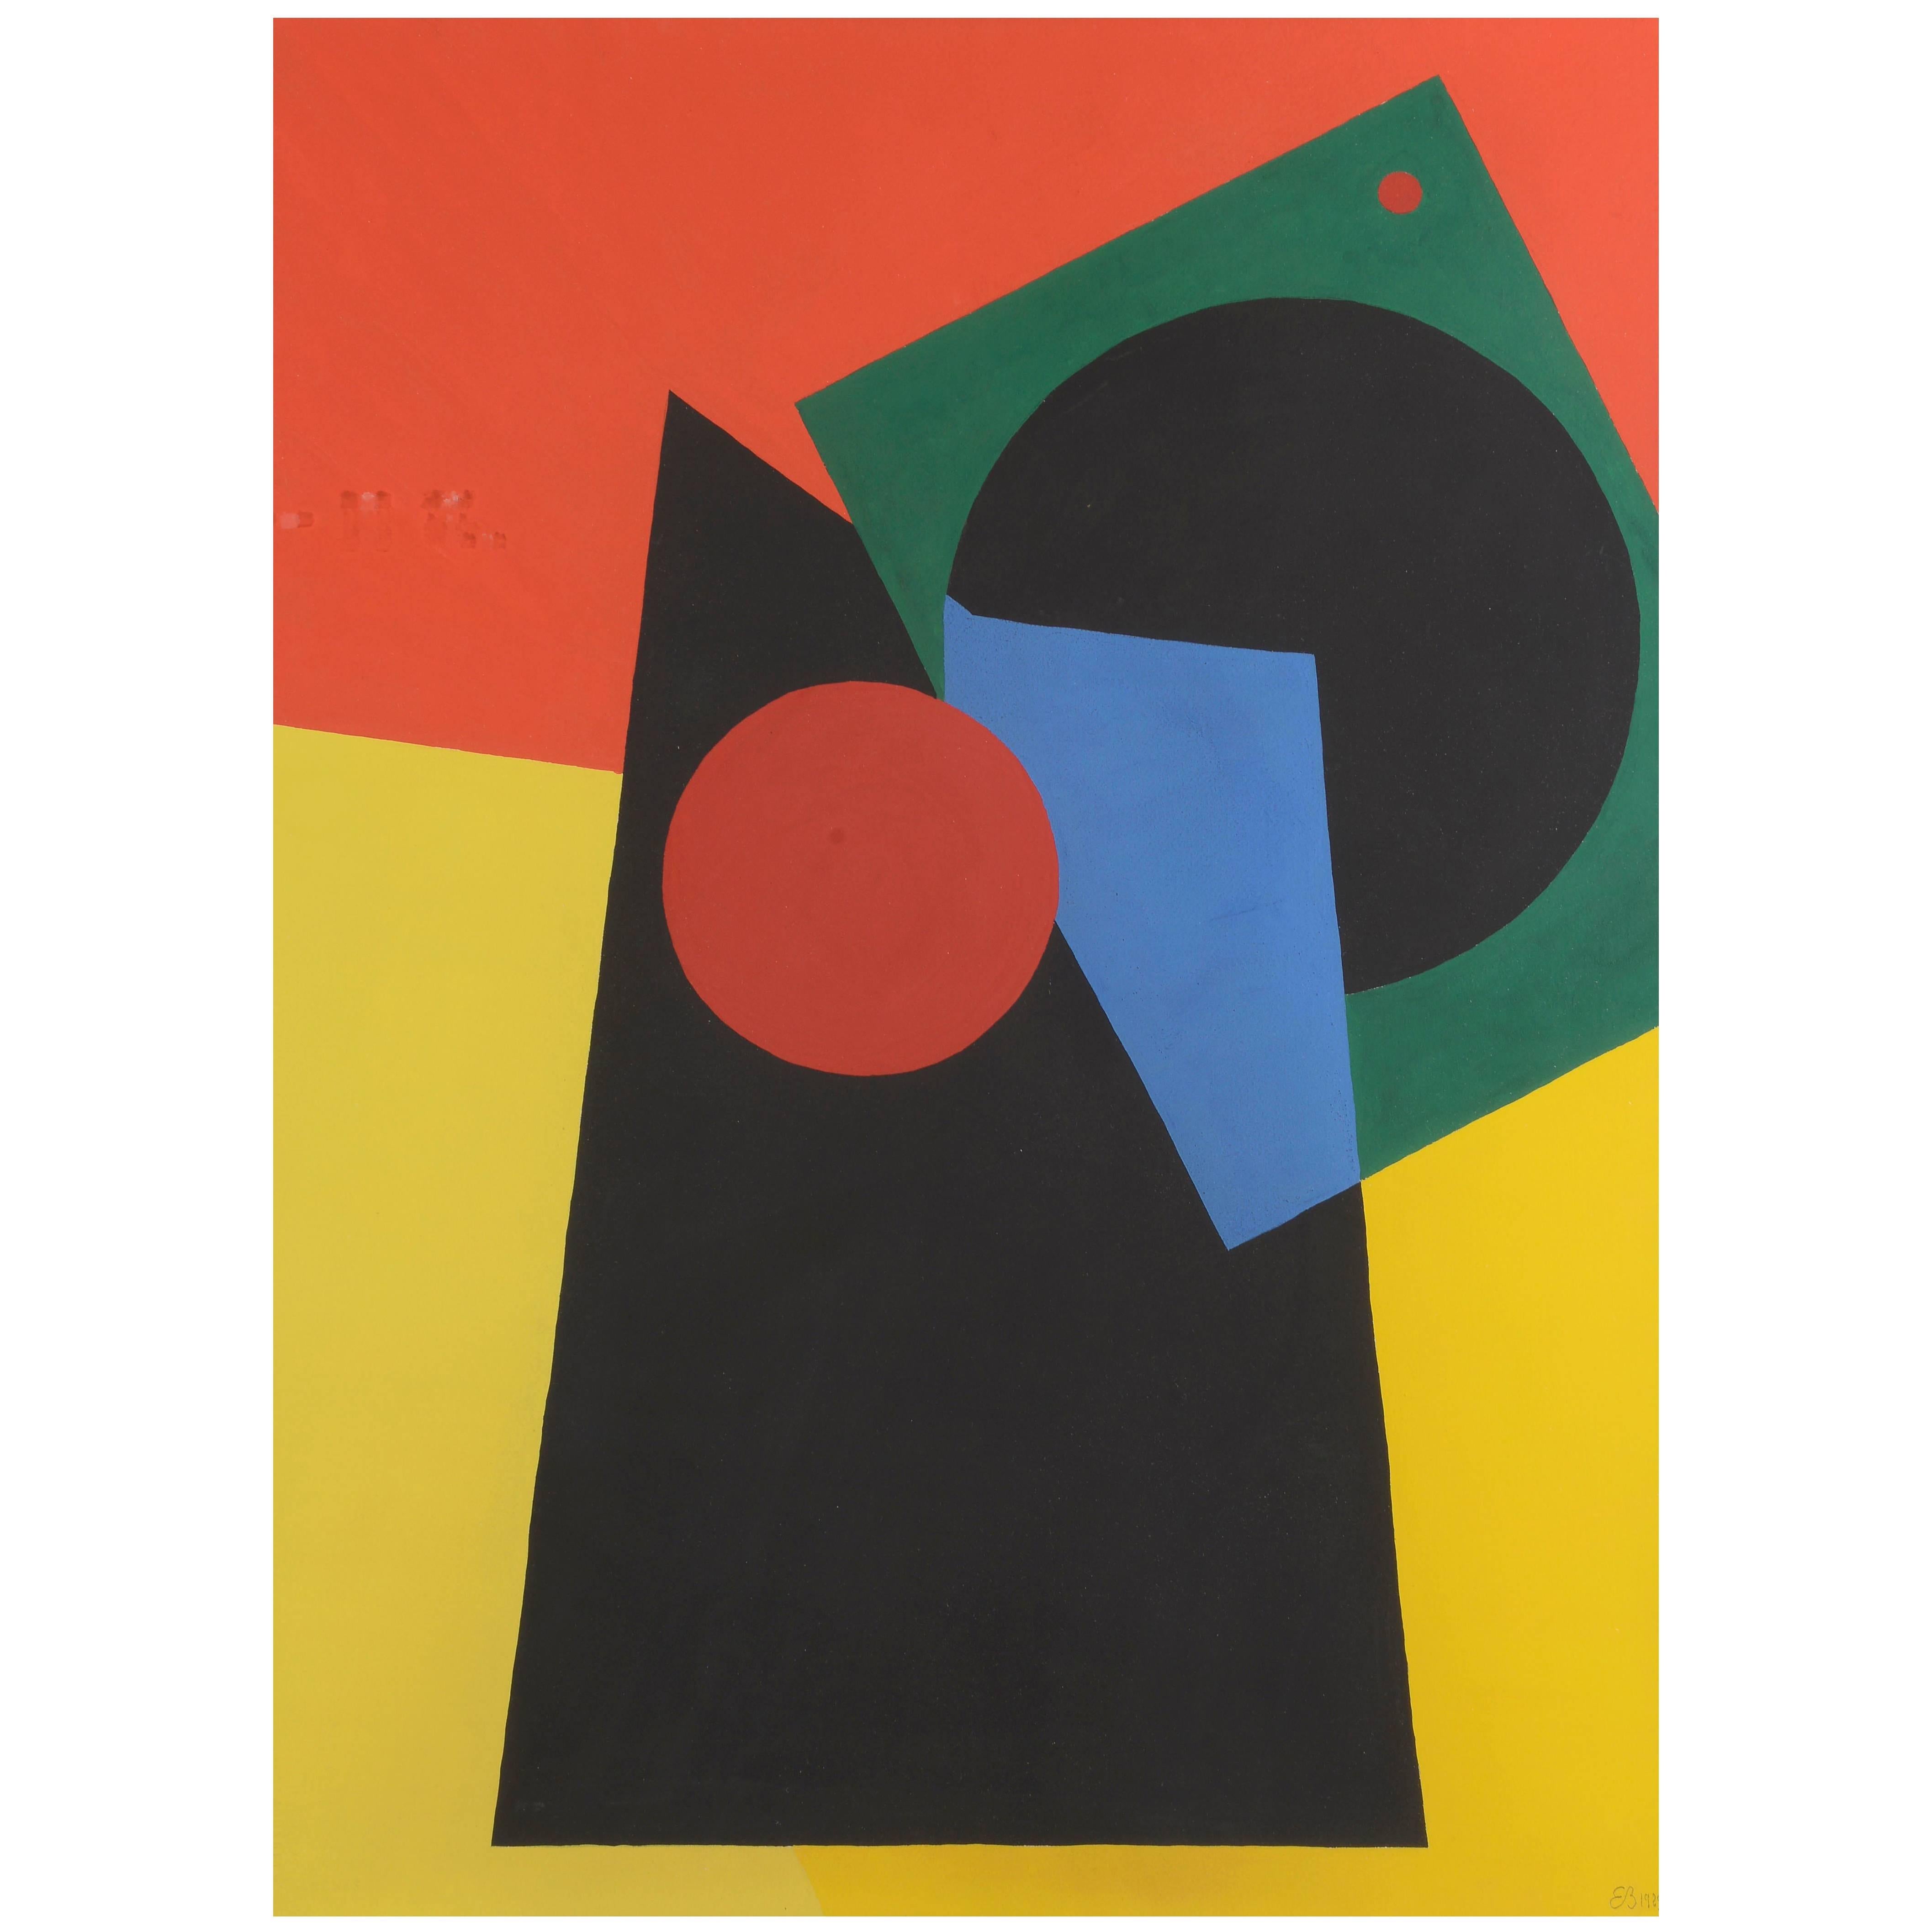 Abstract Composition by Etienne Beothy, 1929-1946